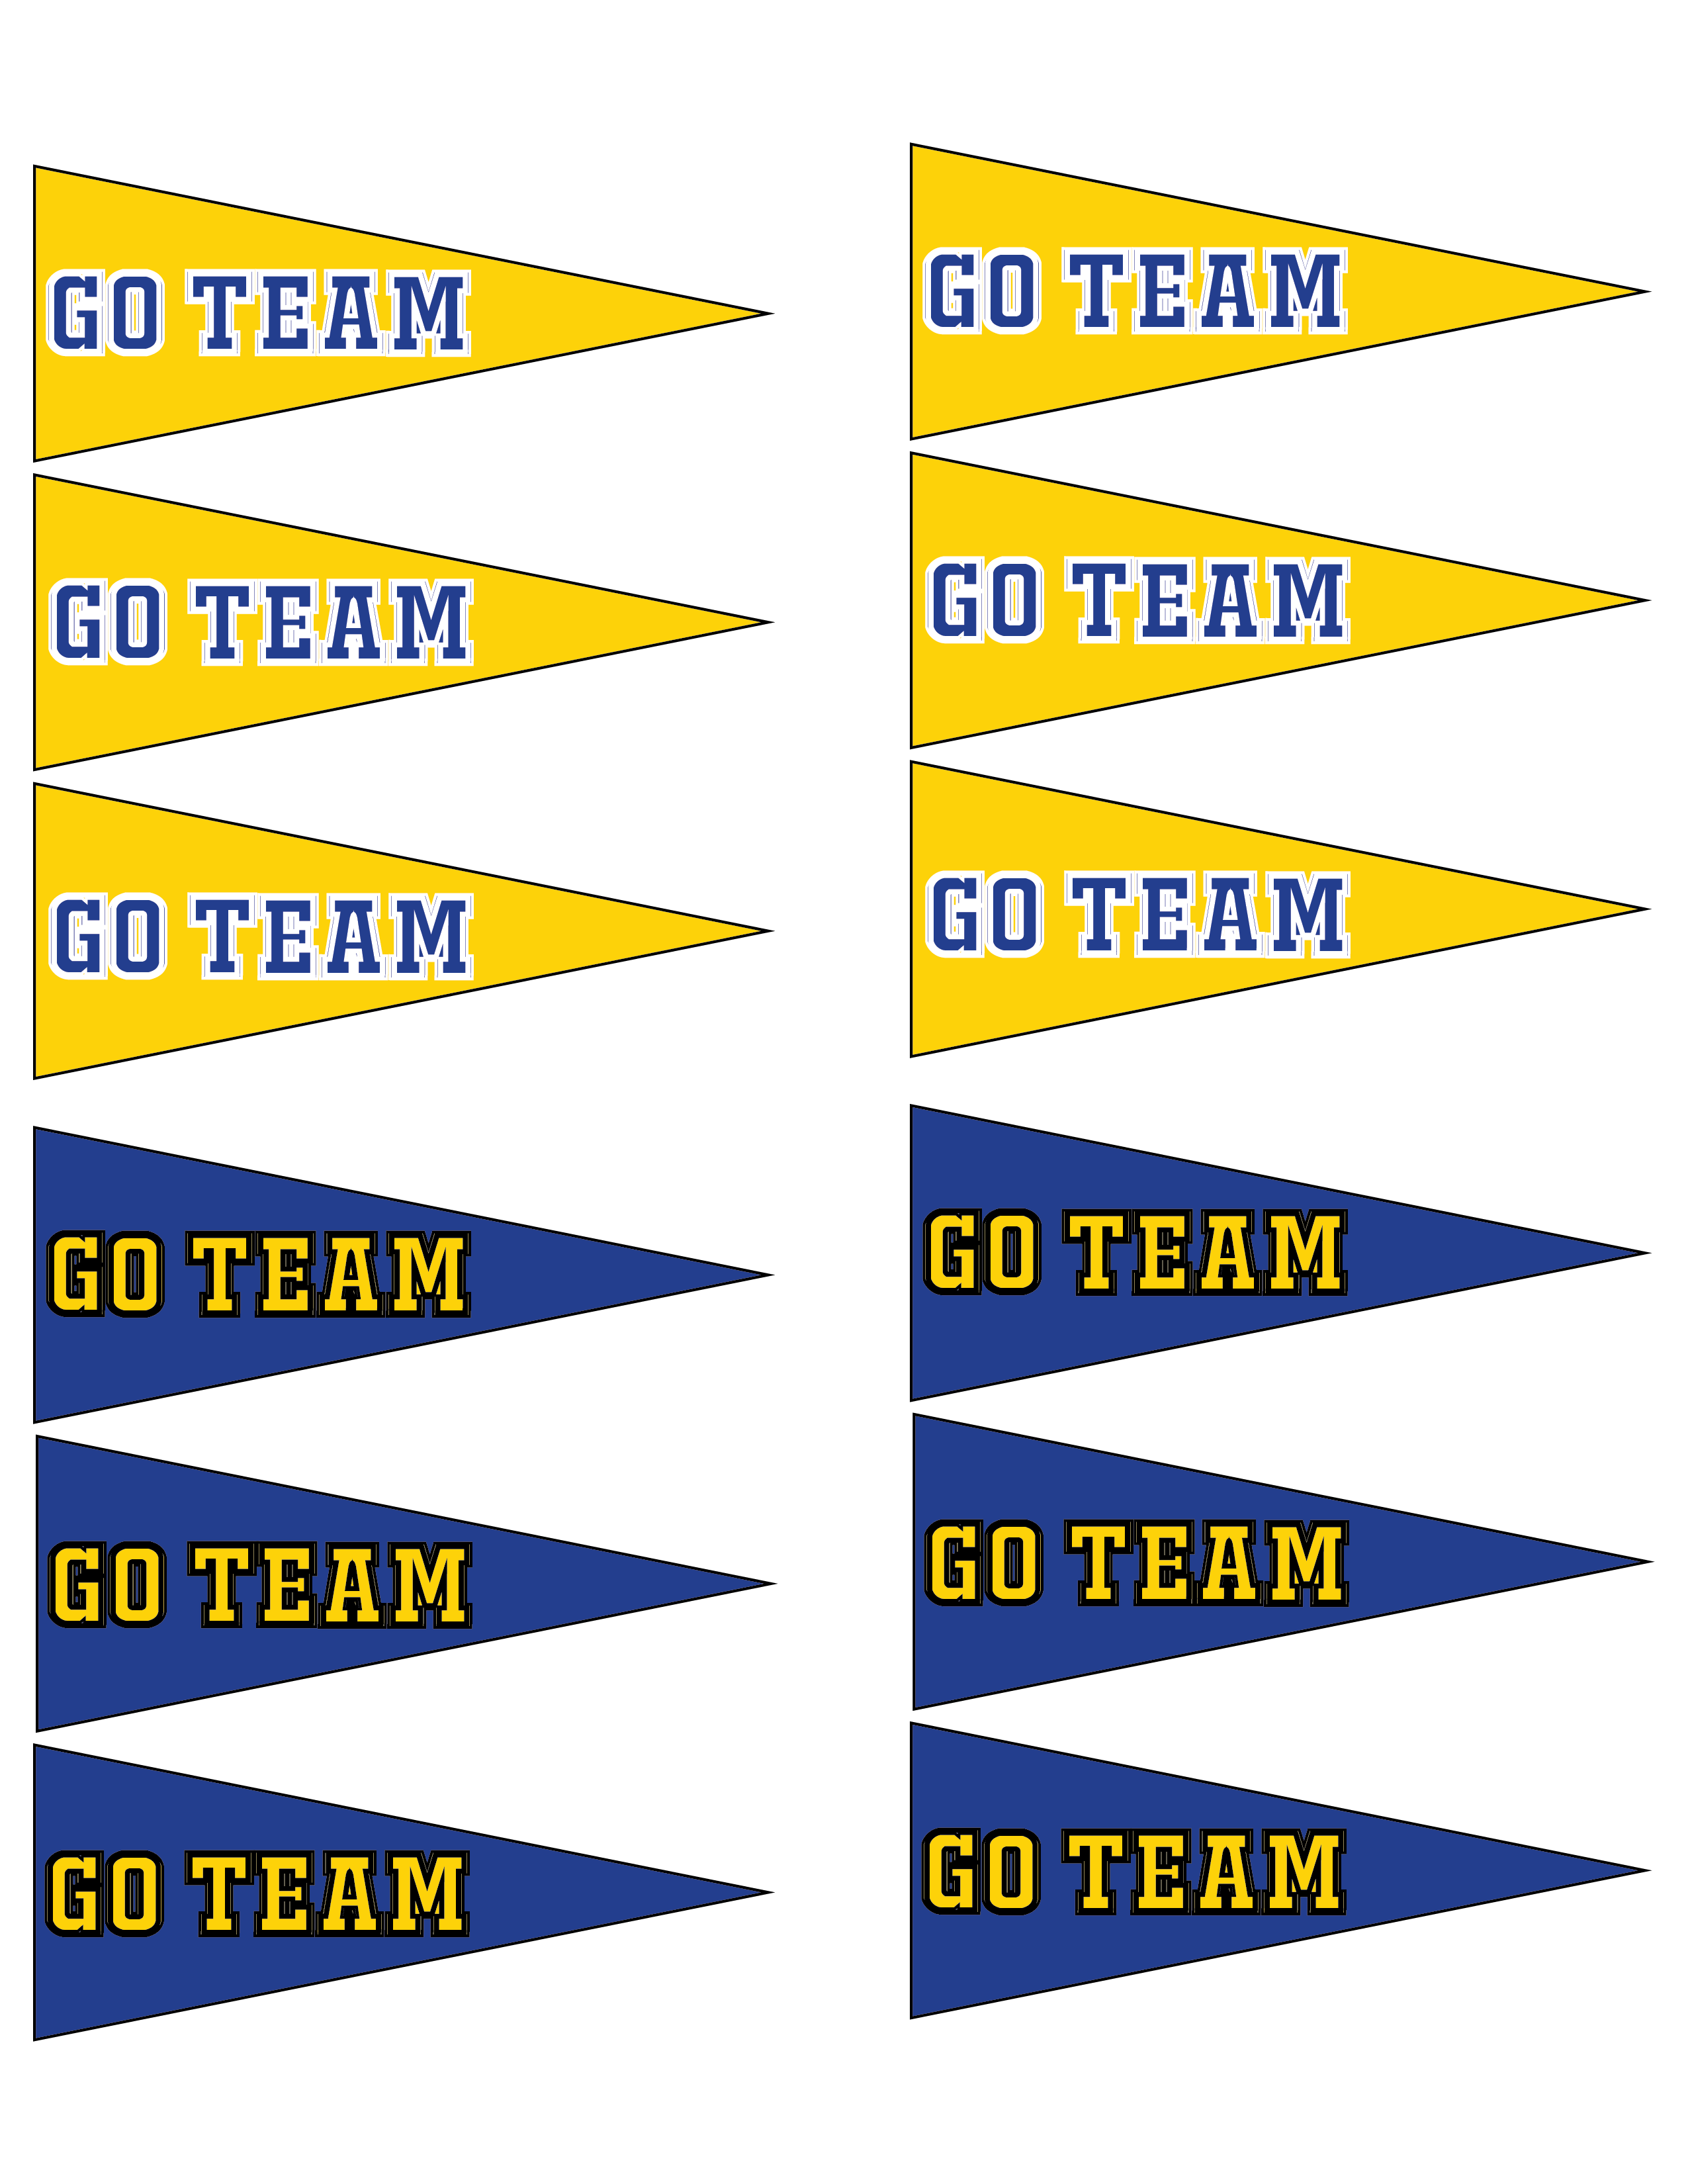 Go team flags in the Rams colors